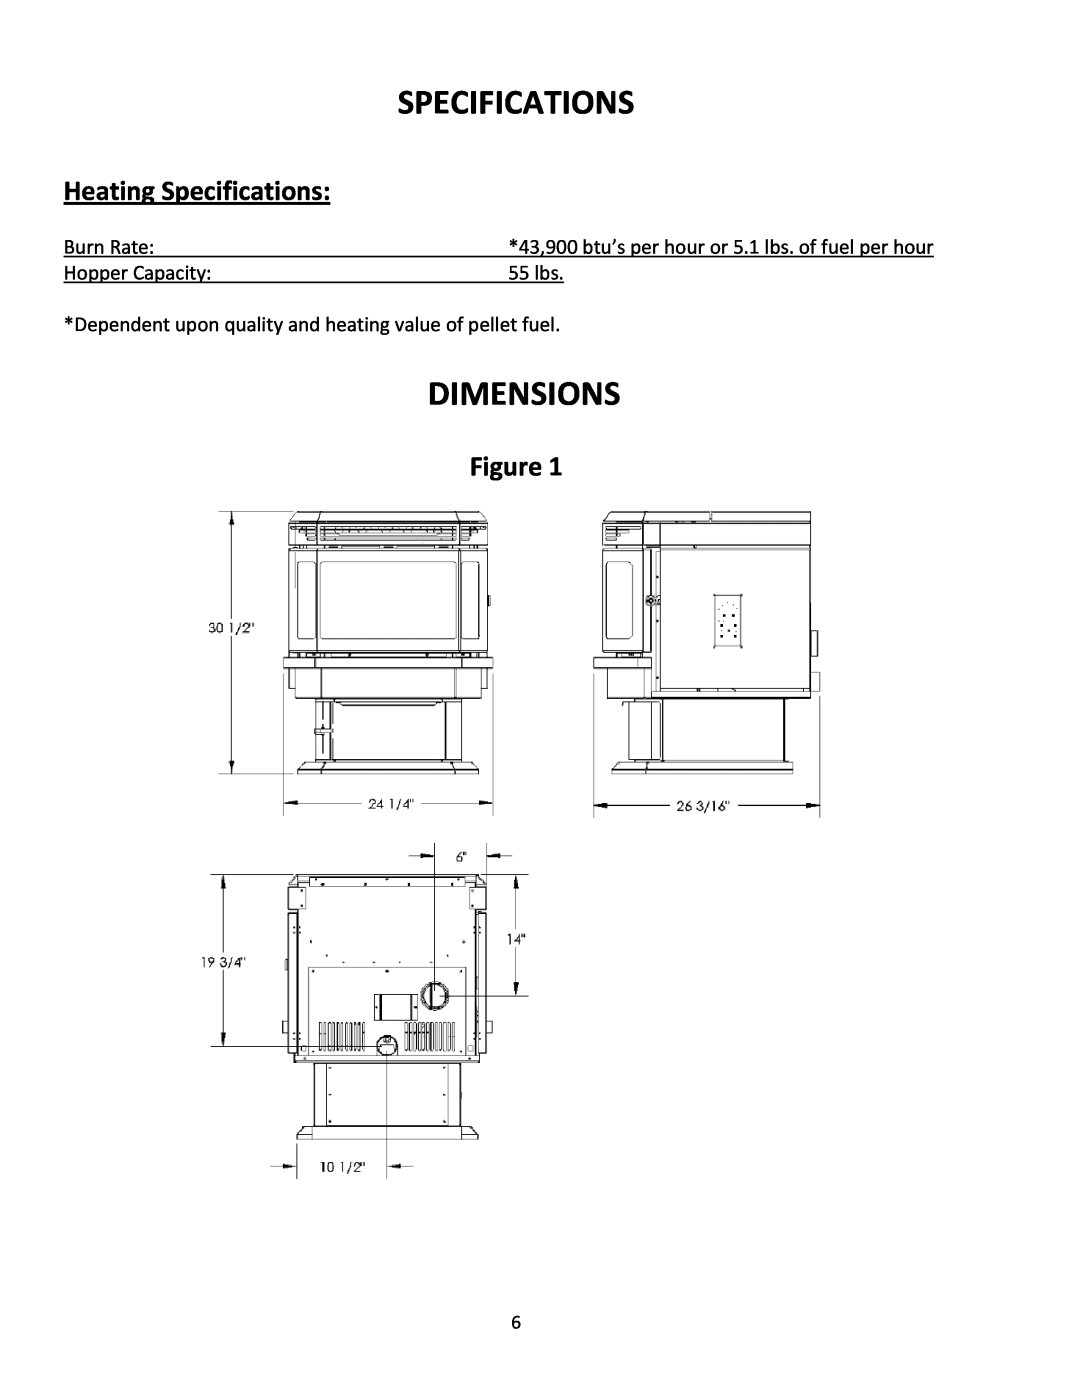 United States Stove 5660(I) manual Dimensions, Heating Specifications 